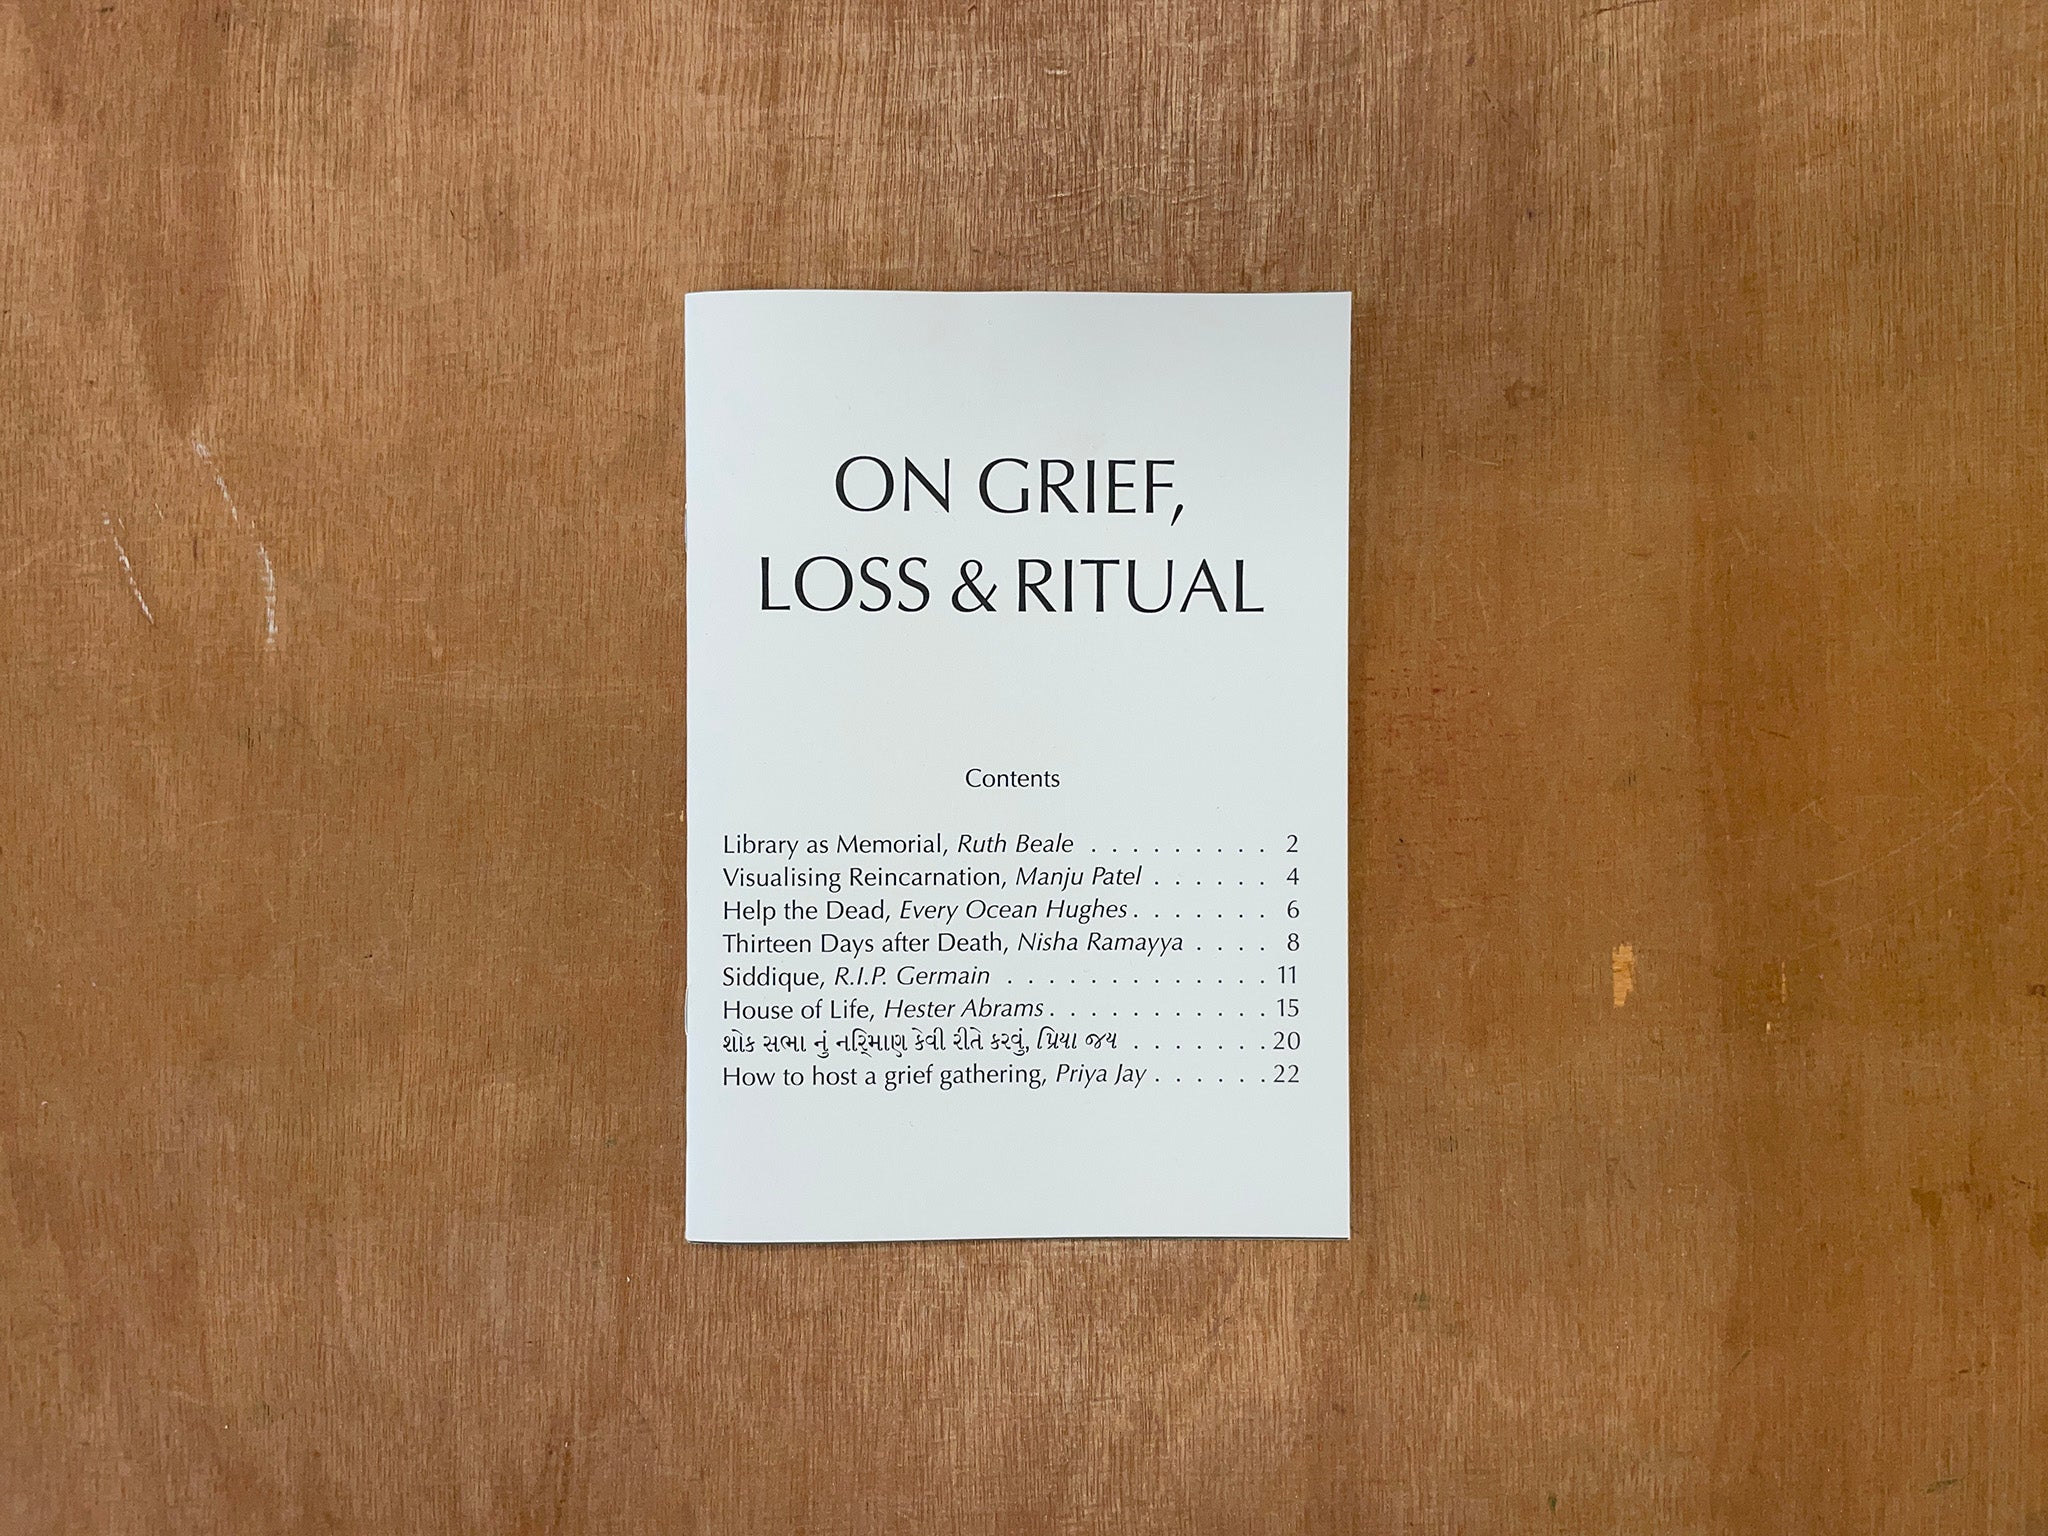 ON GRIEF, LOSS & RITUAL Edited by Ruth Beale